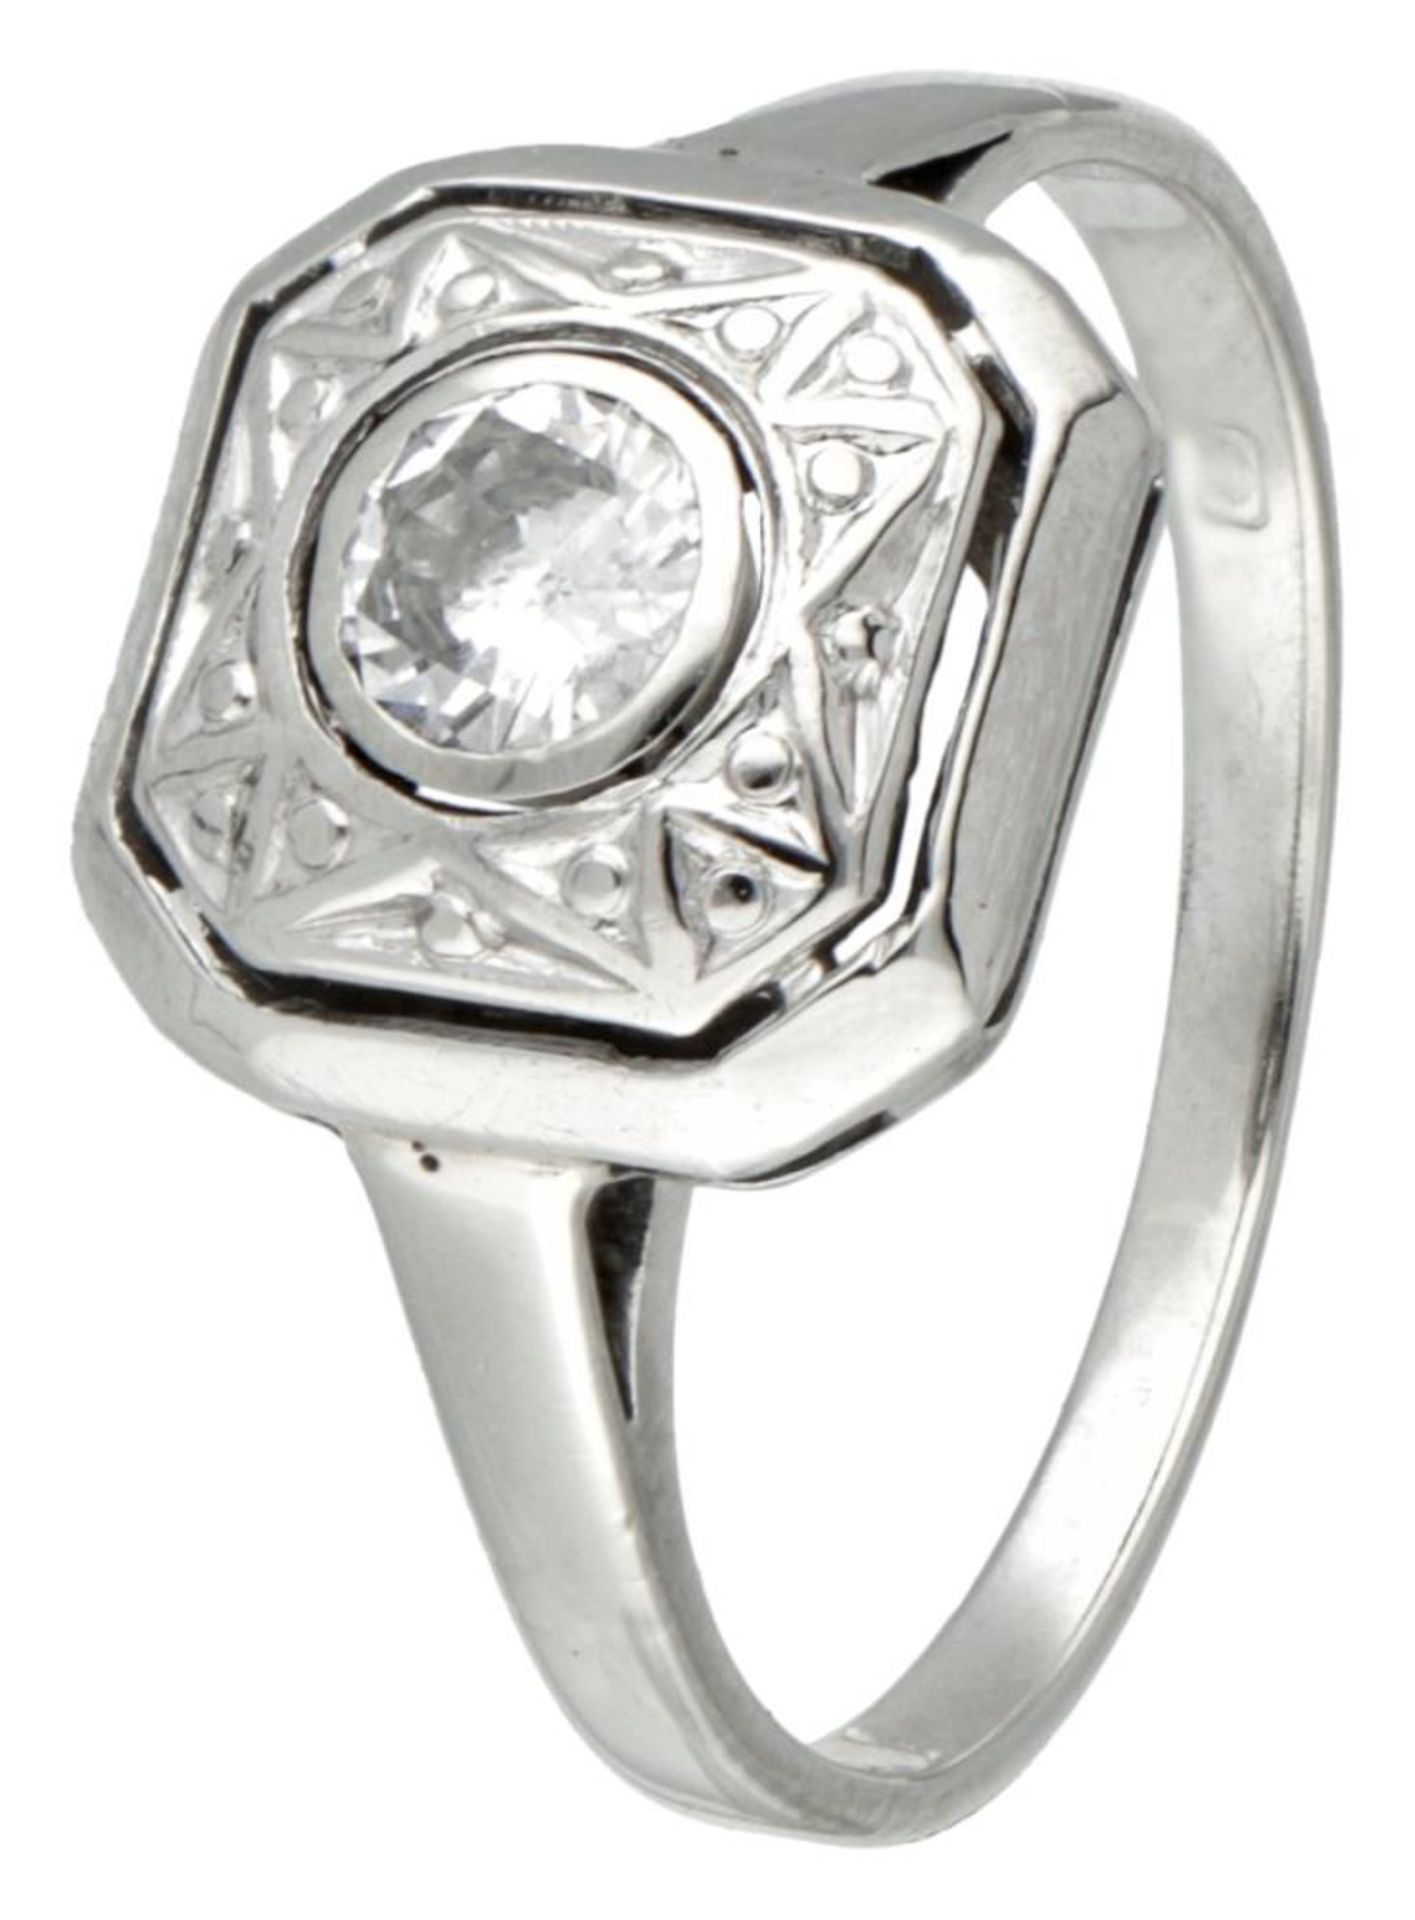 14K. White gold vintage ring set with approx. 0.17 ct. diamond.